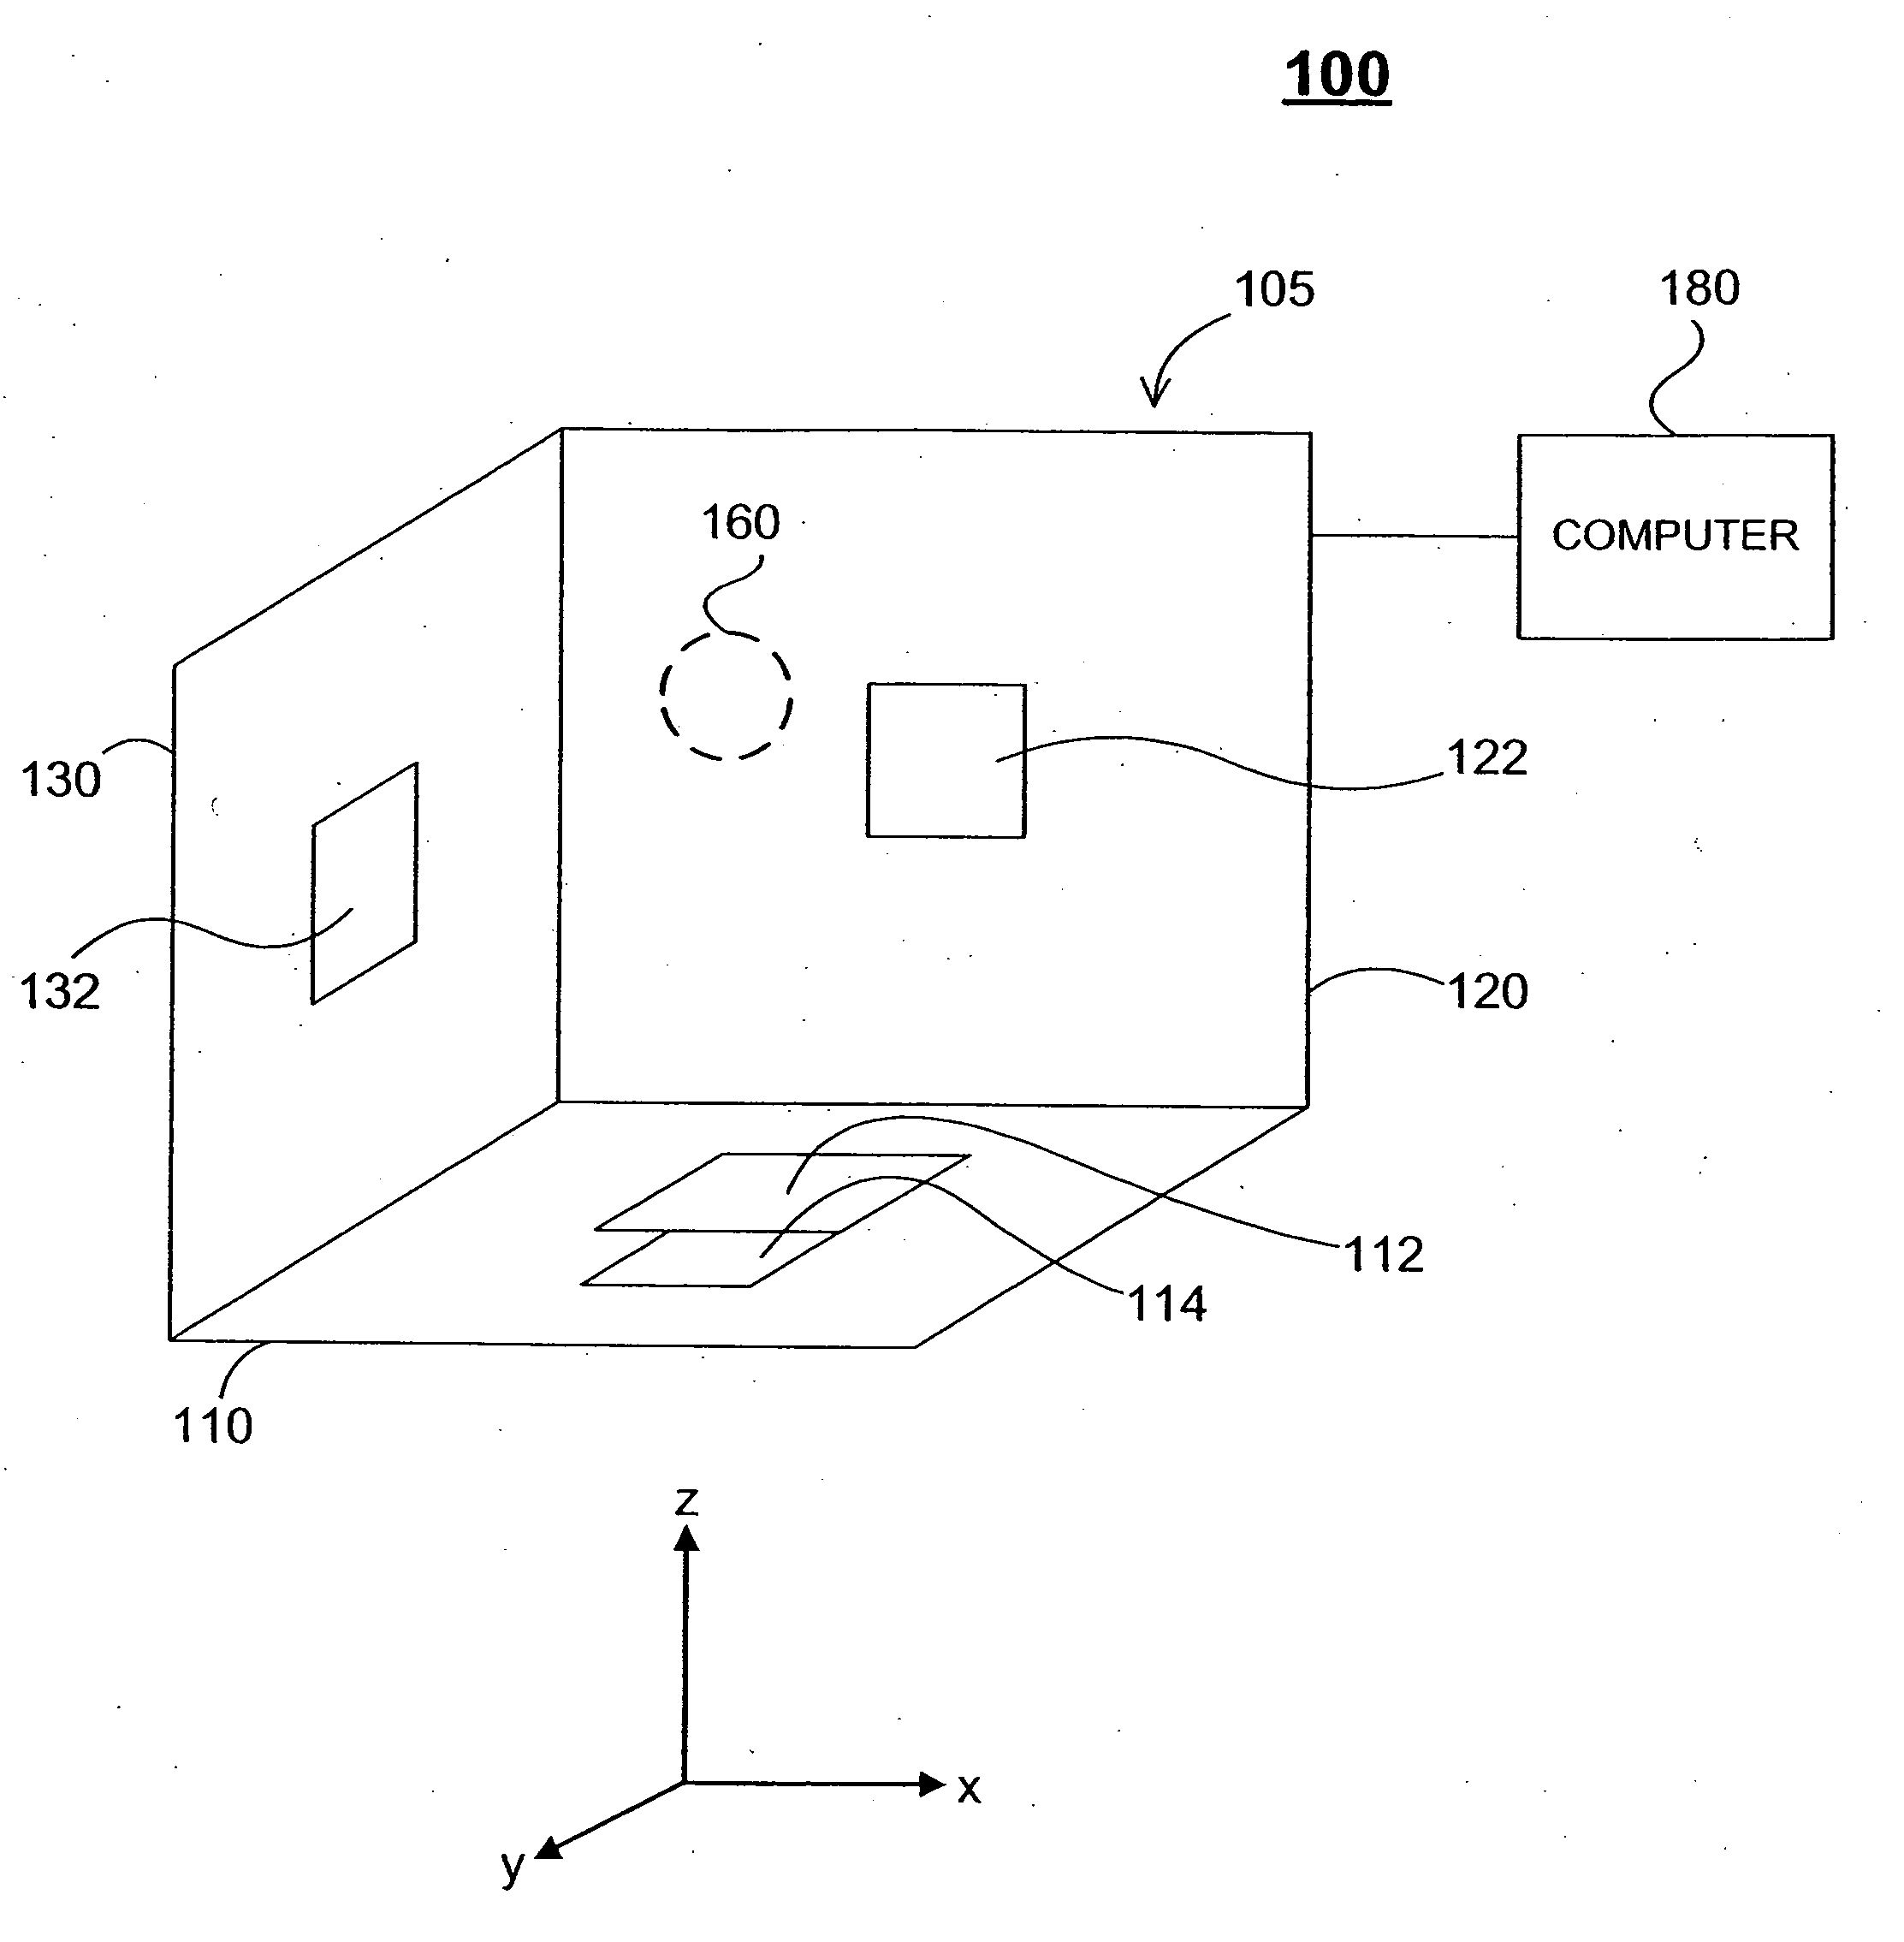 System and method for using magnetic sensors to track the position of an object